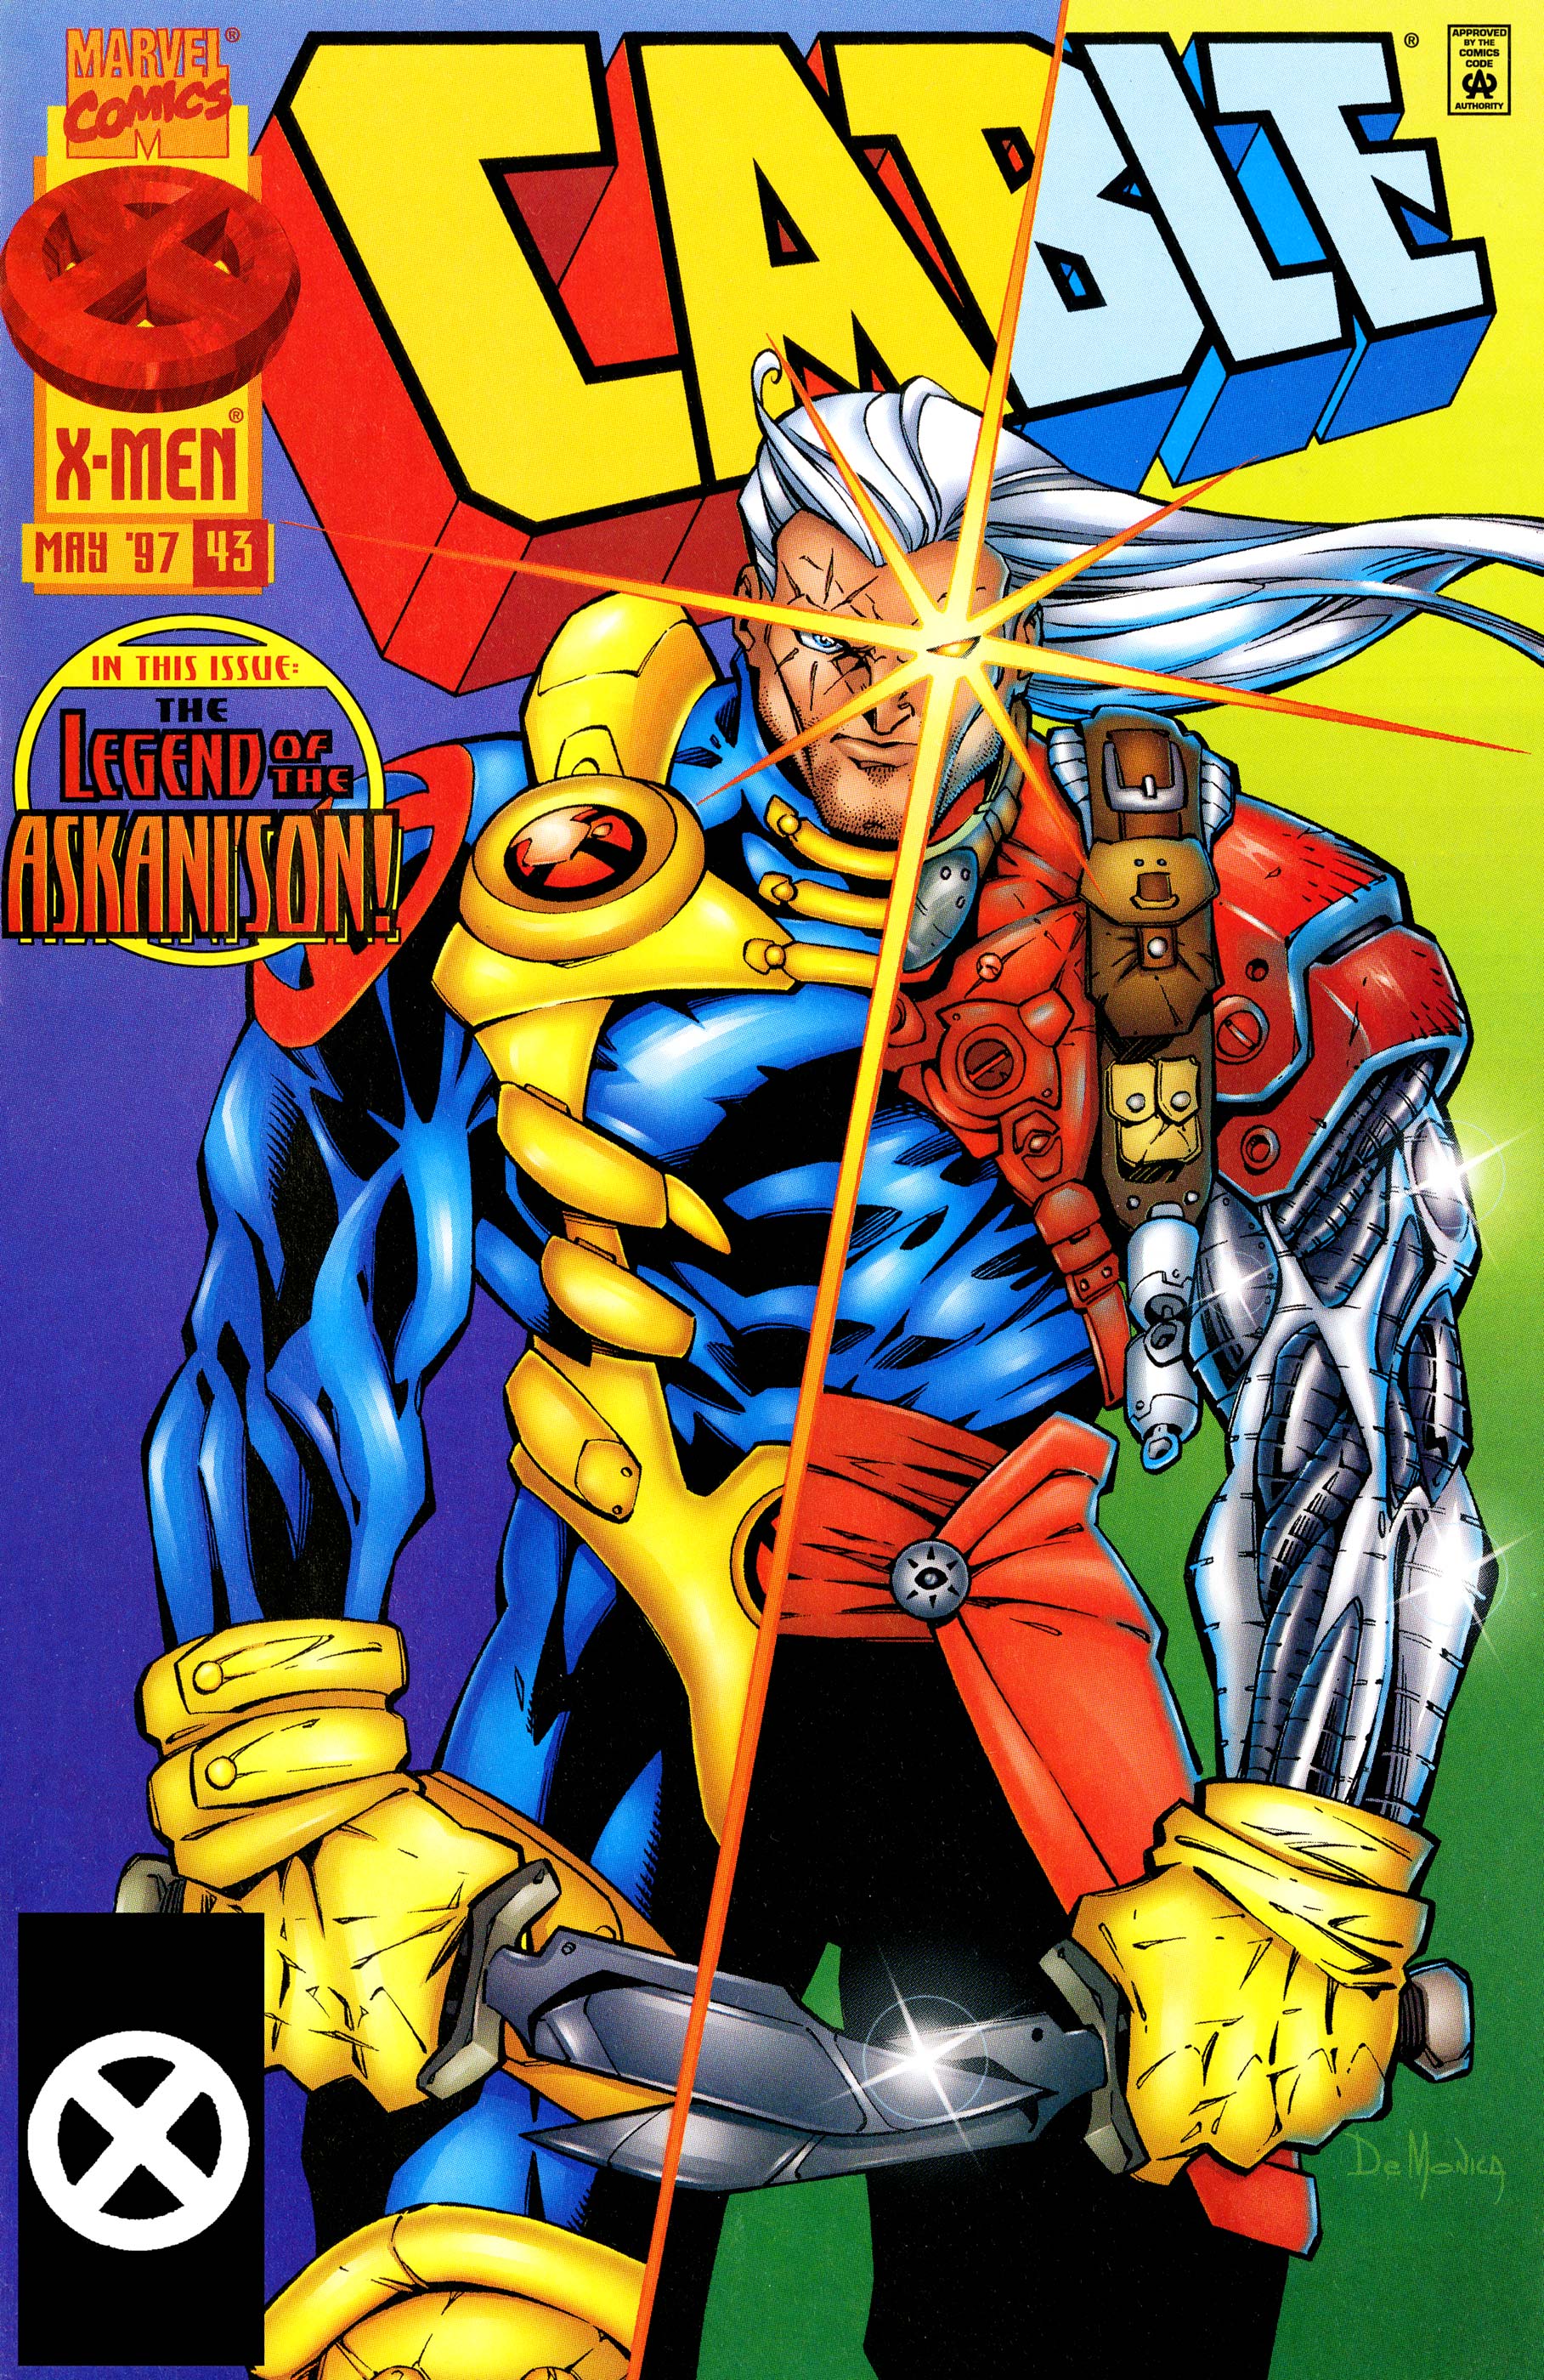 Cable (1993) #43